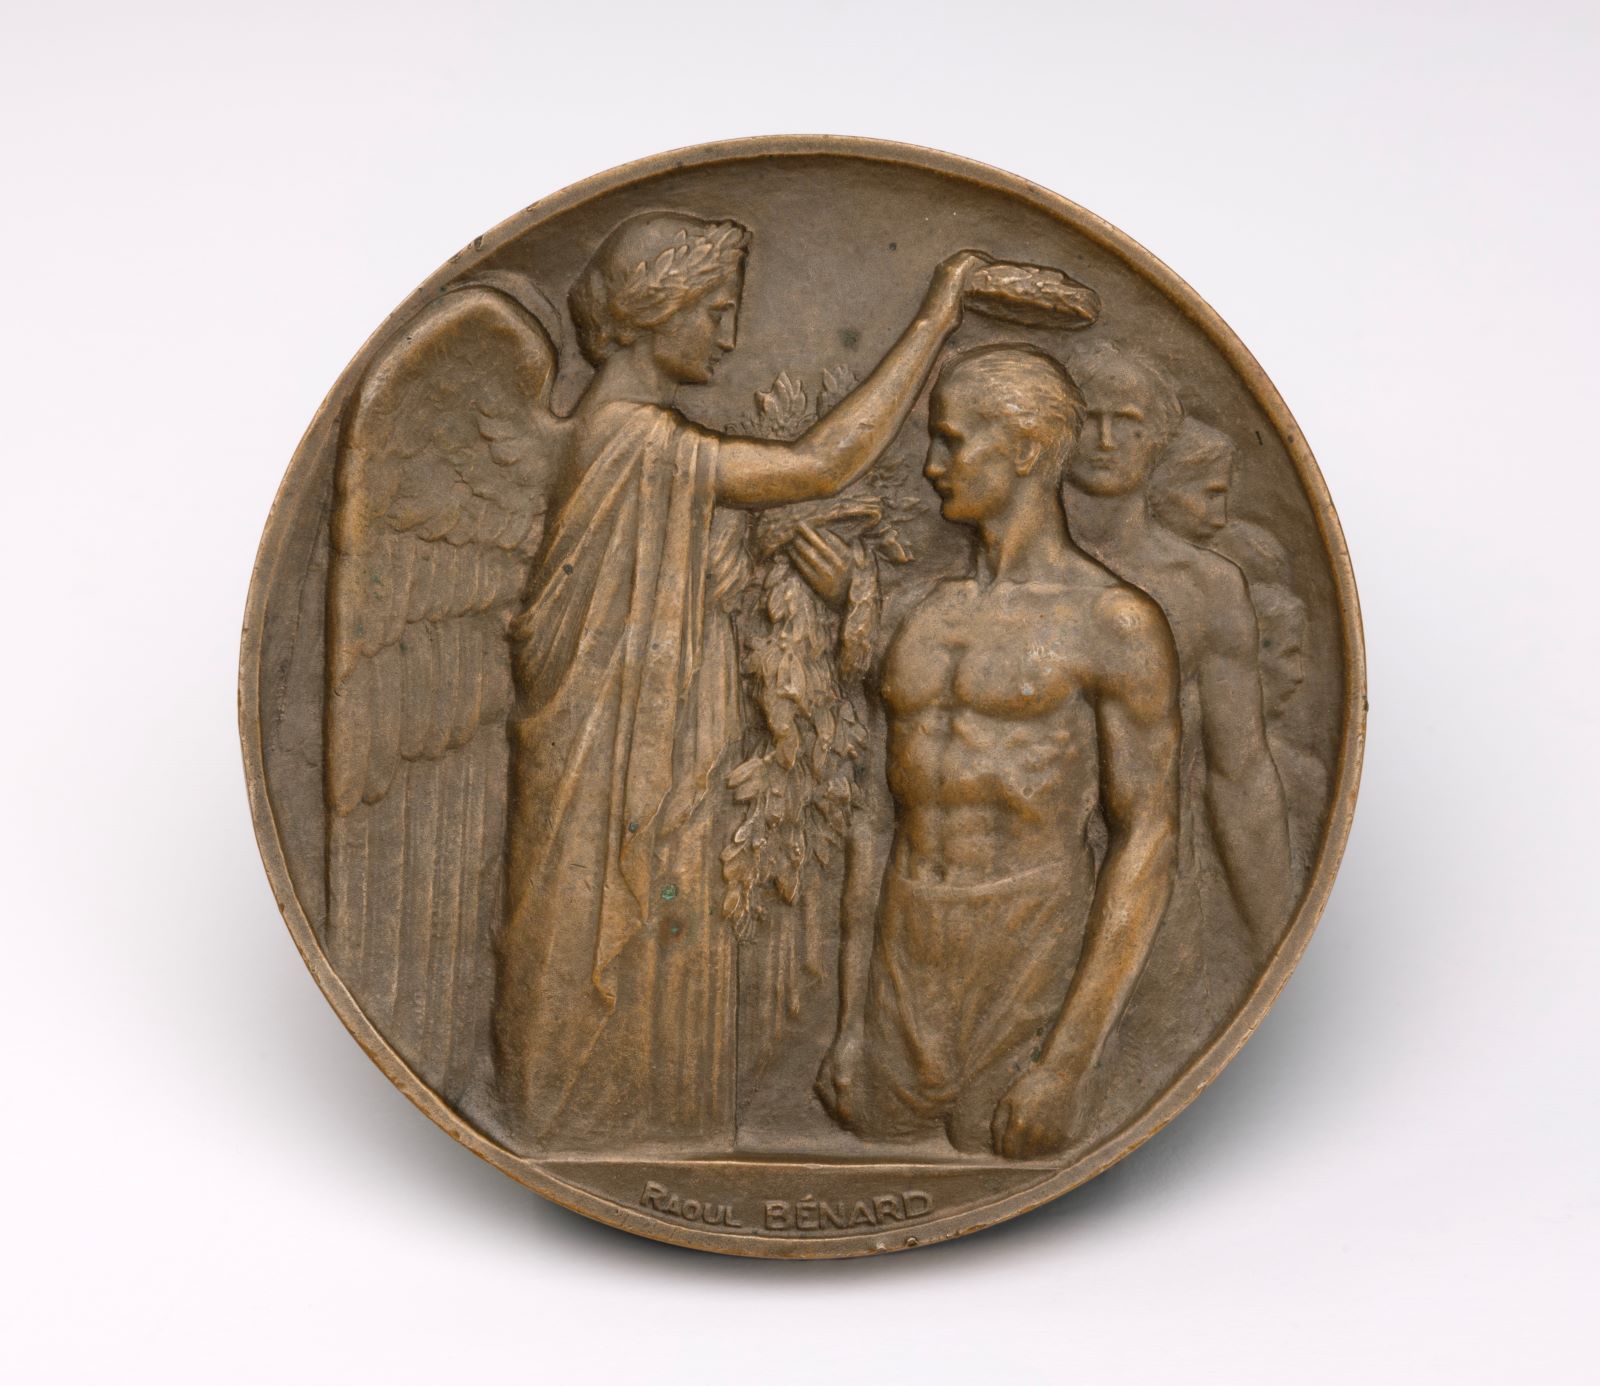 Medal with two figures